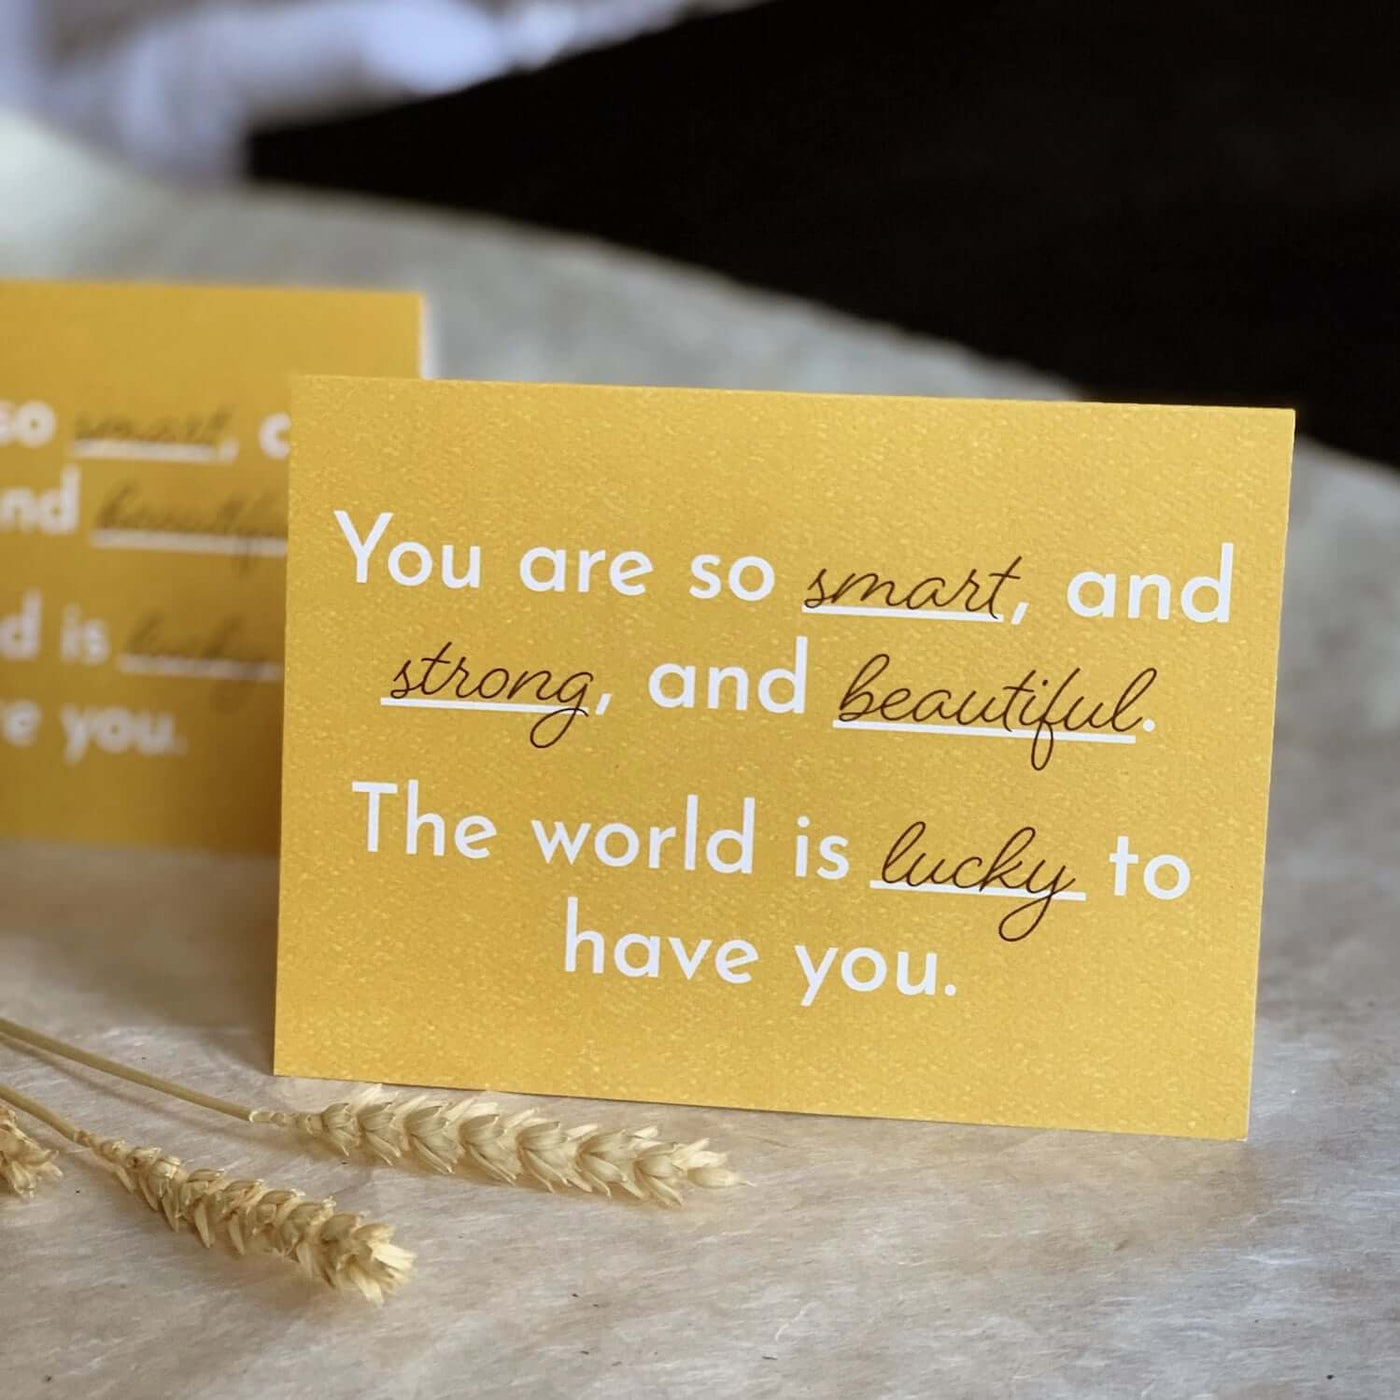 A set of affirmation greeting cards featuring a cheerful yellow color, designed to inspire positivity and self-confidence.